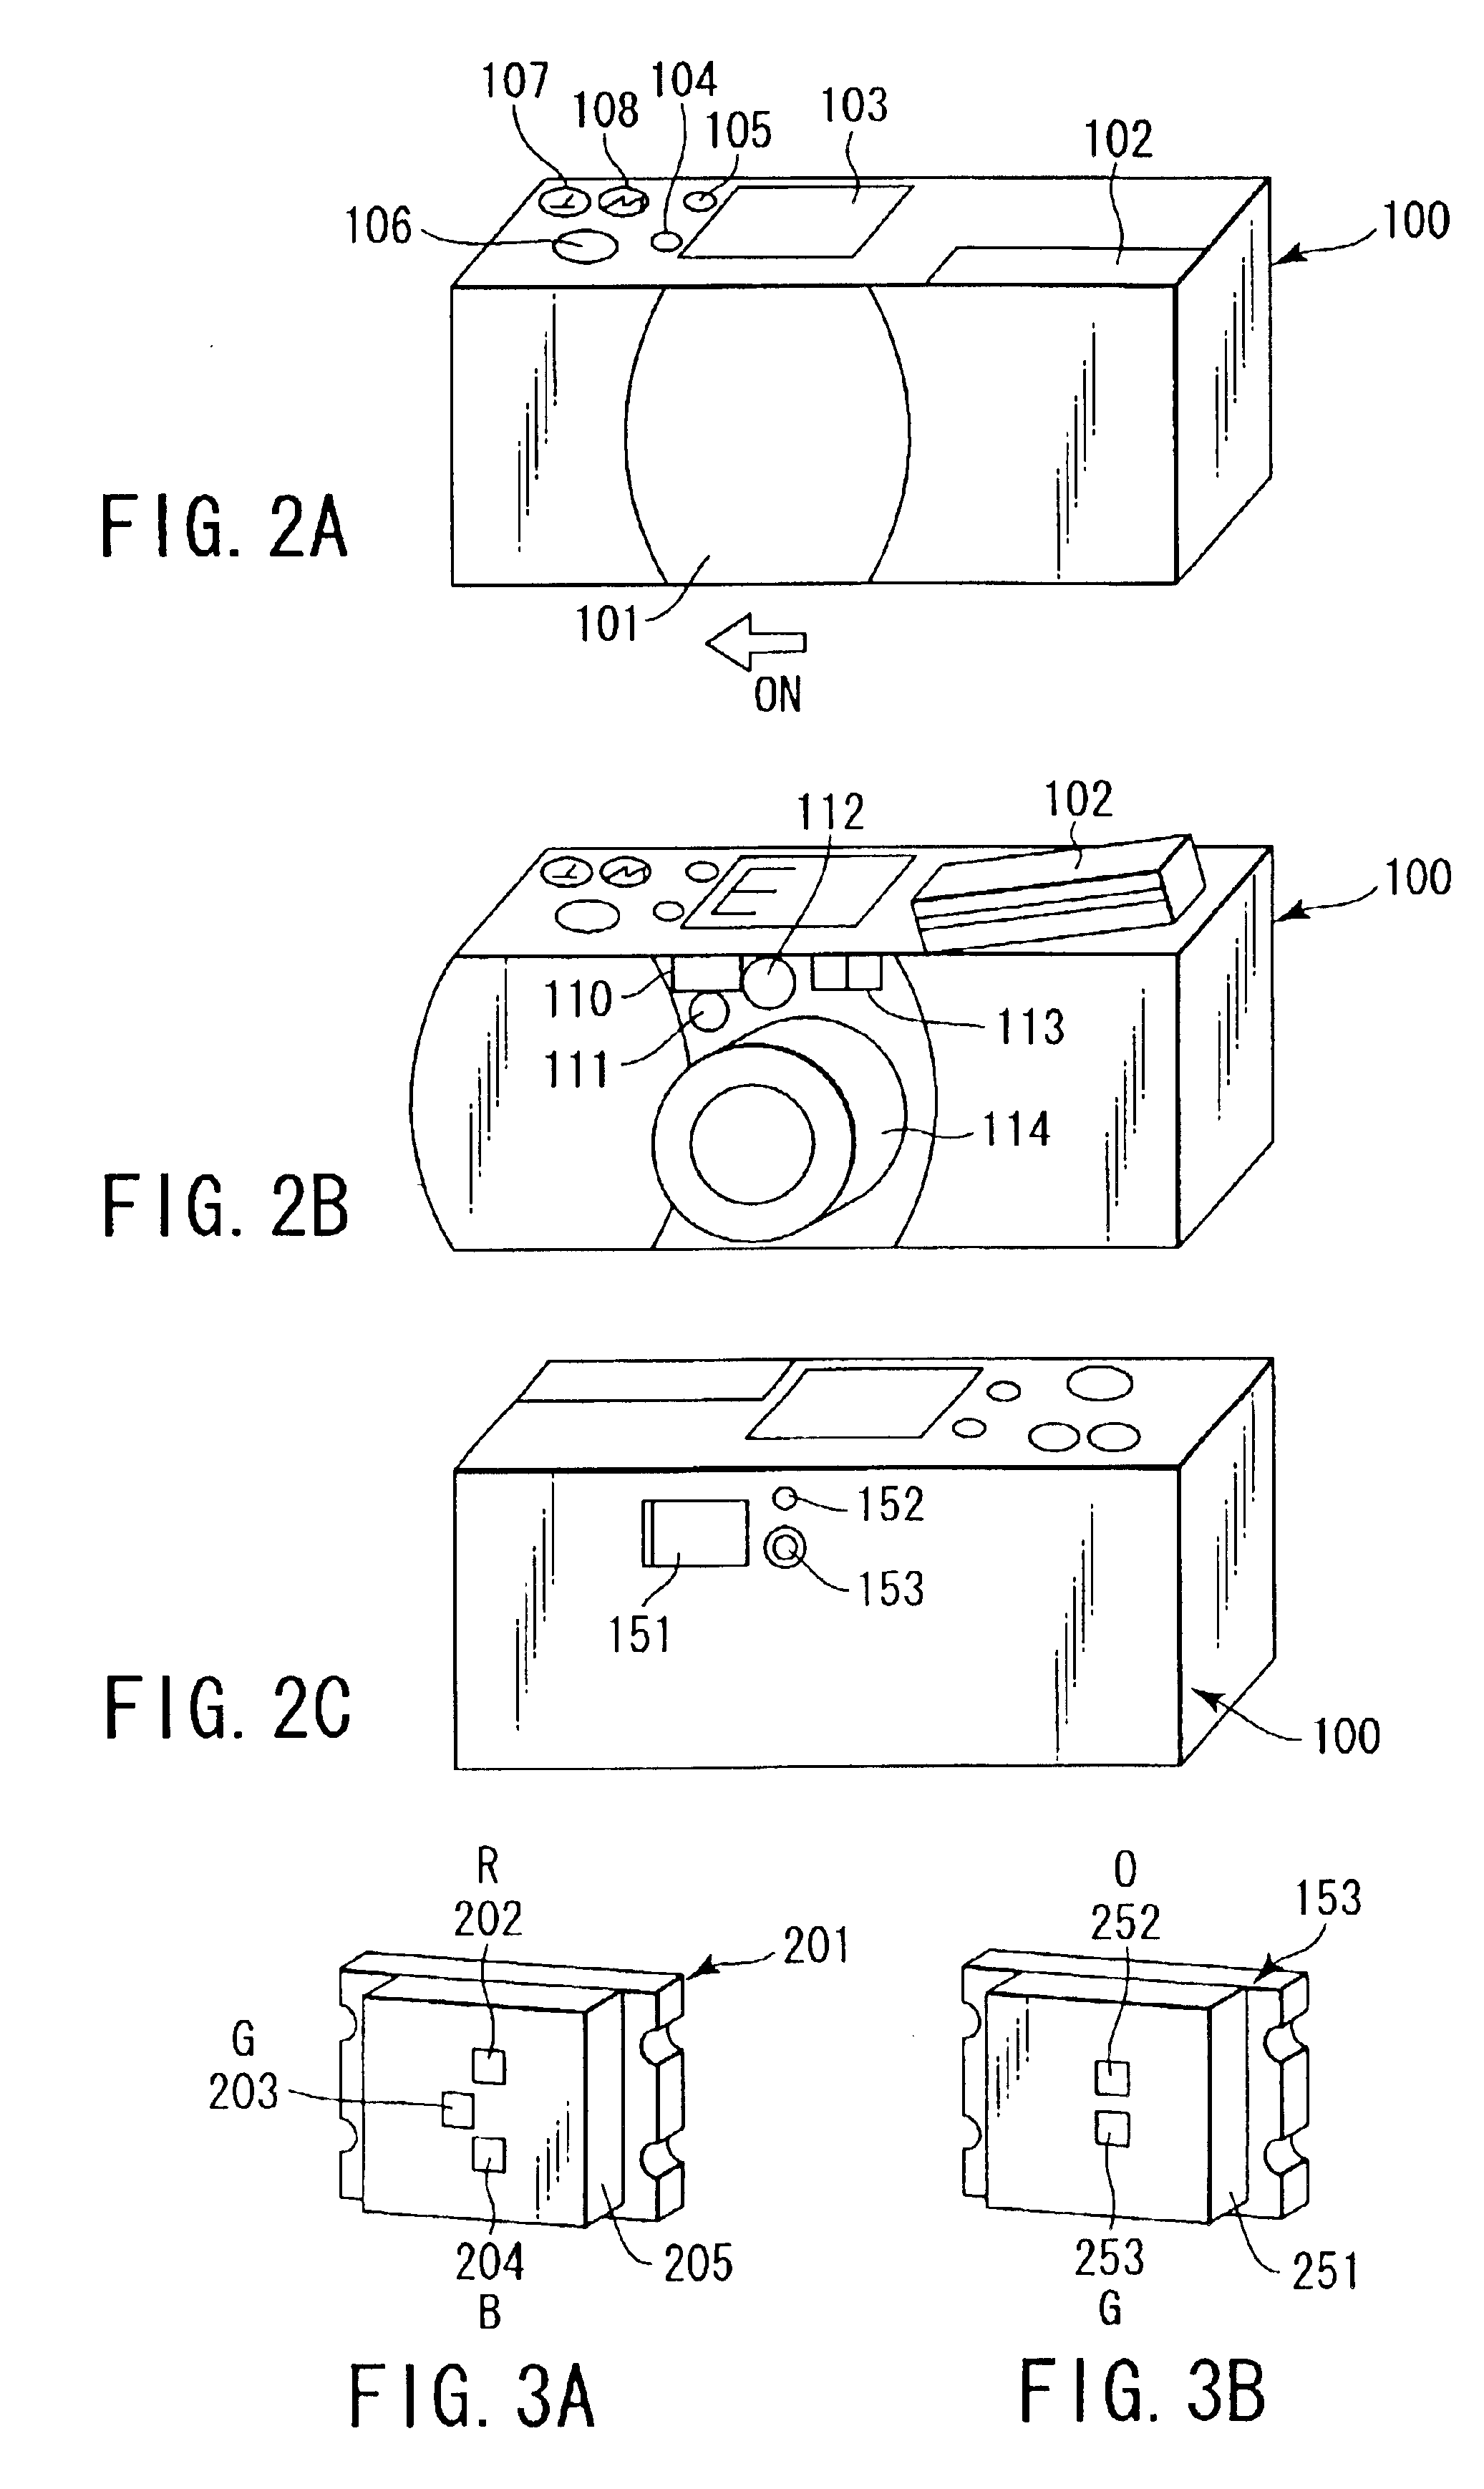 Camera with light emission function, camera part inspection apparatus, camera adjustment apparatus, and camera part unit